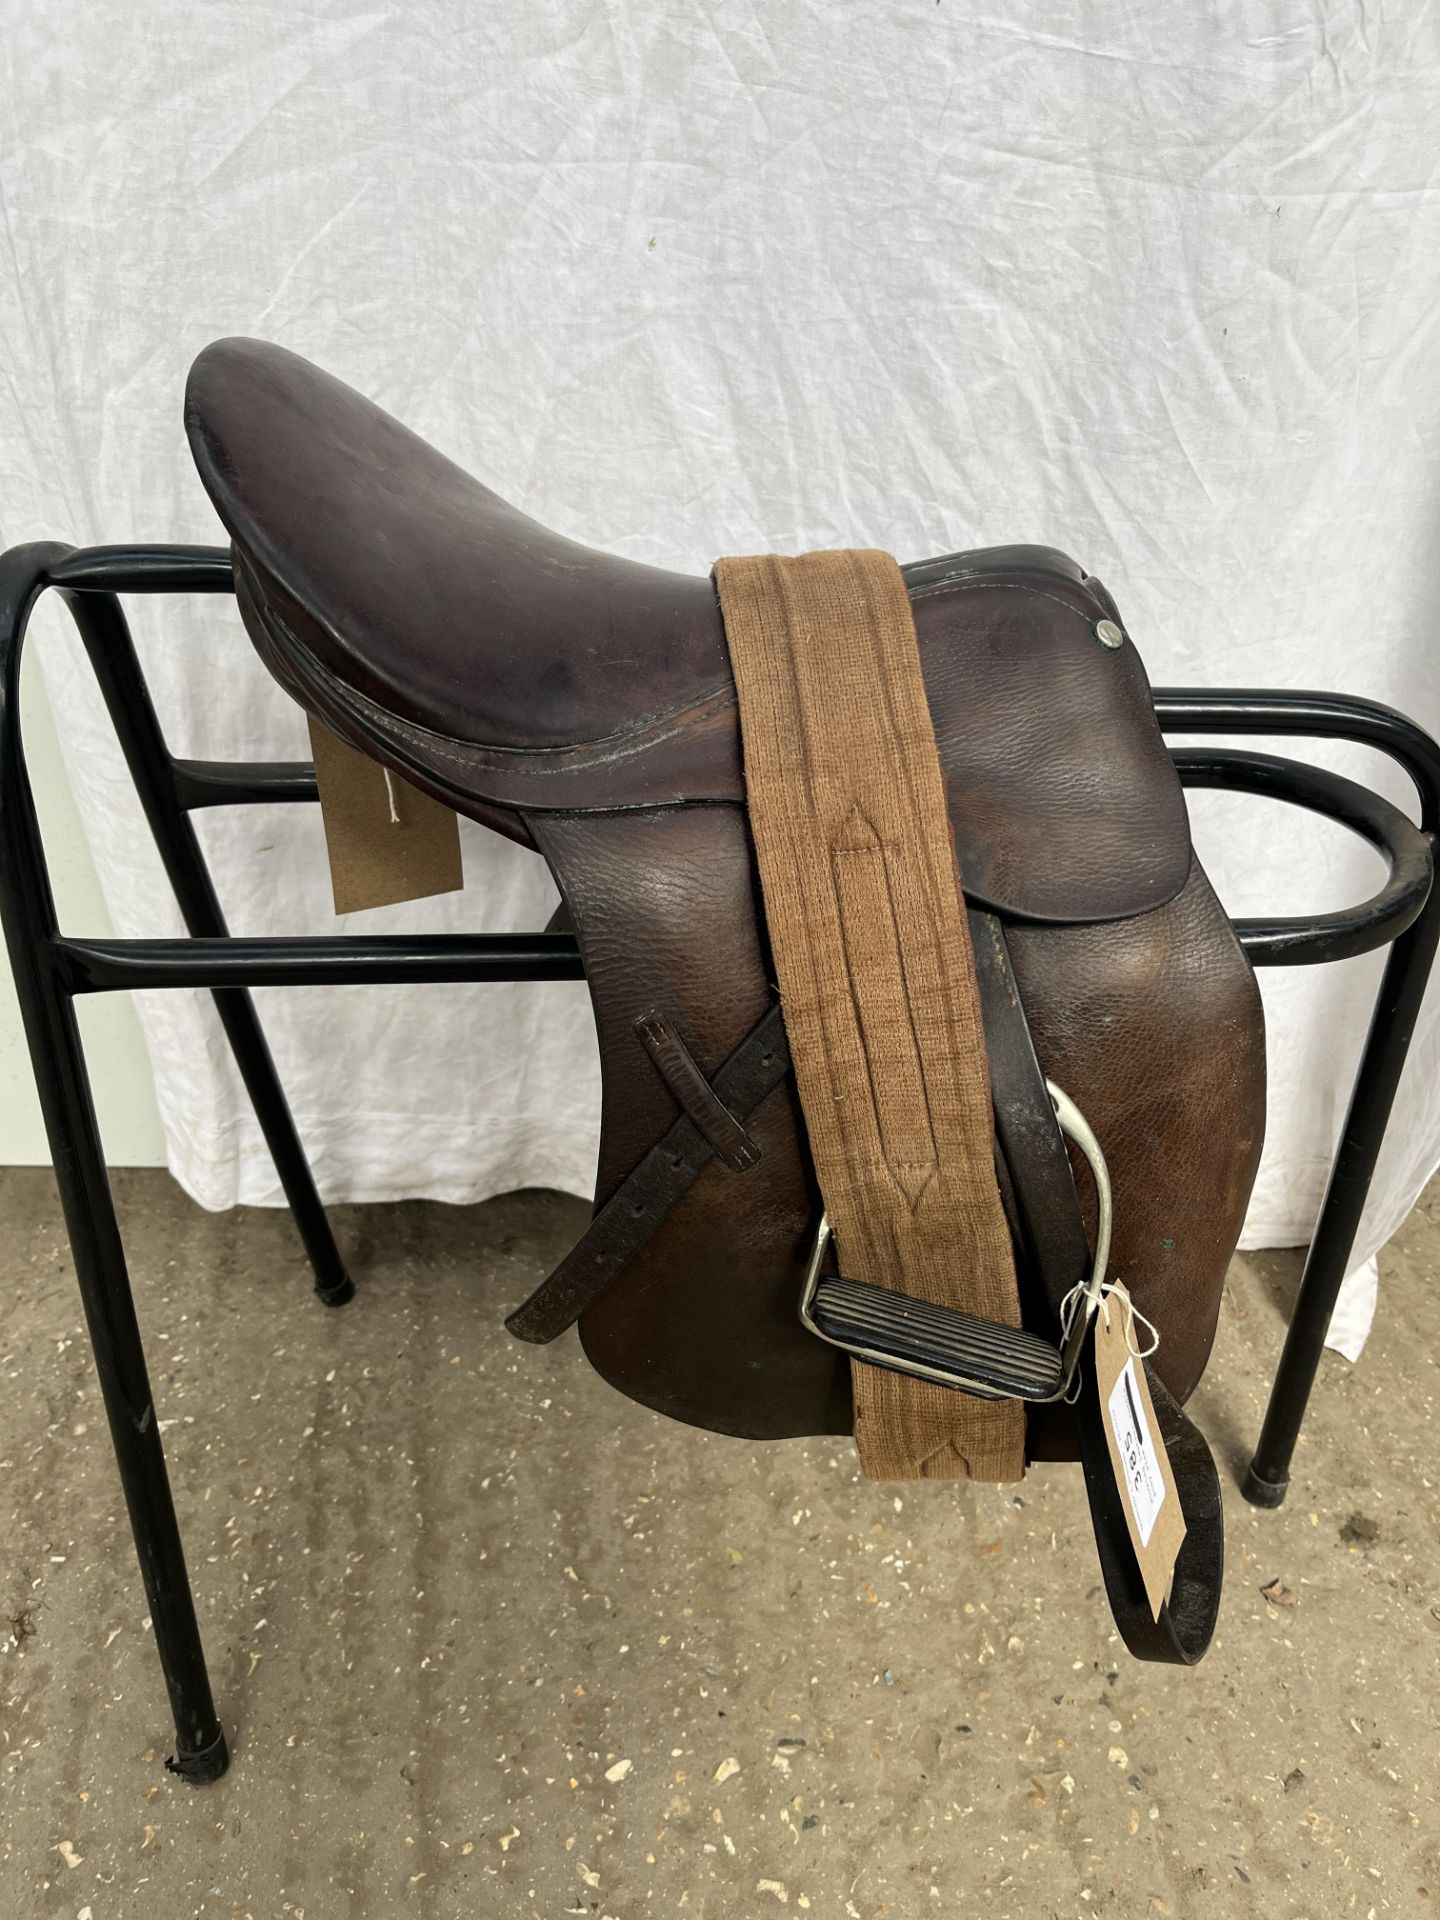 Working leather pony saddle 13.5" with girth